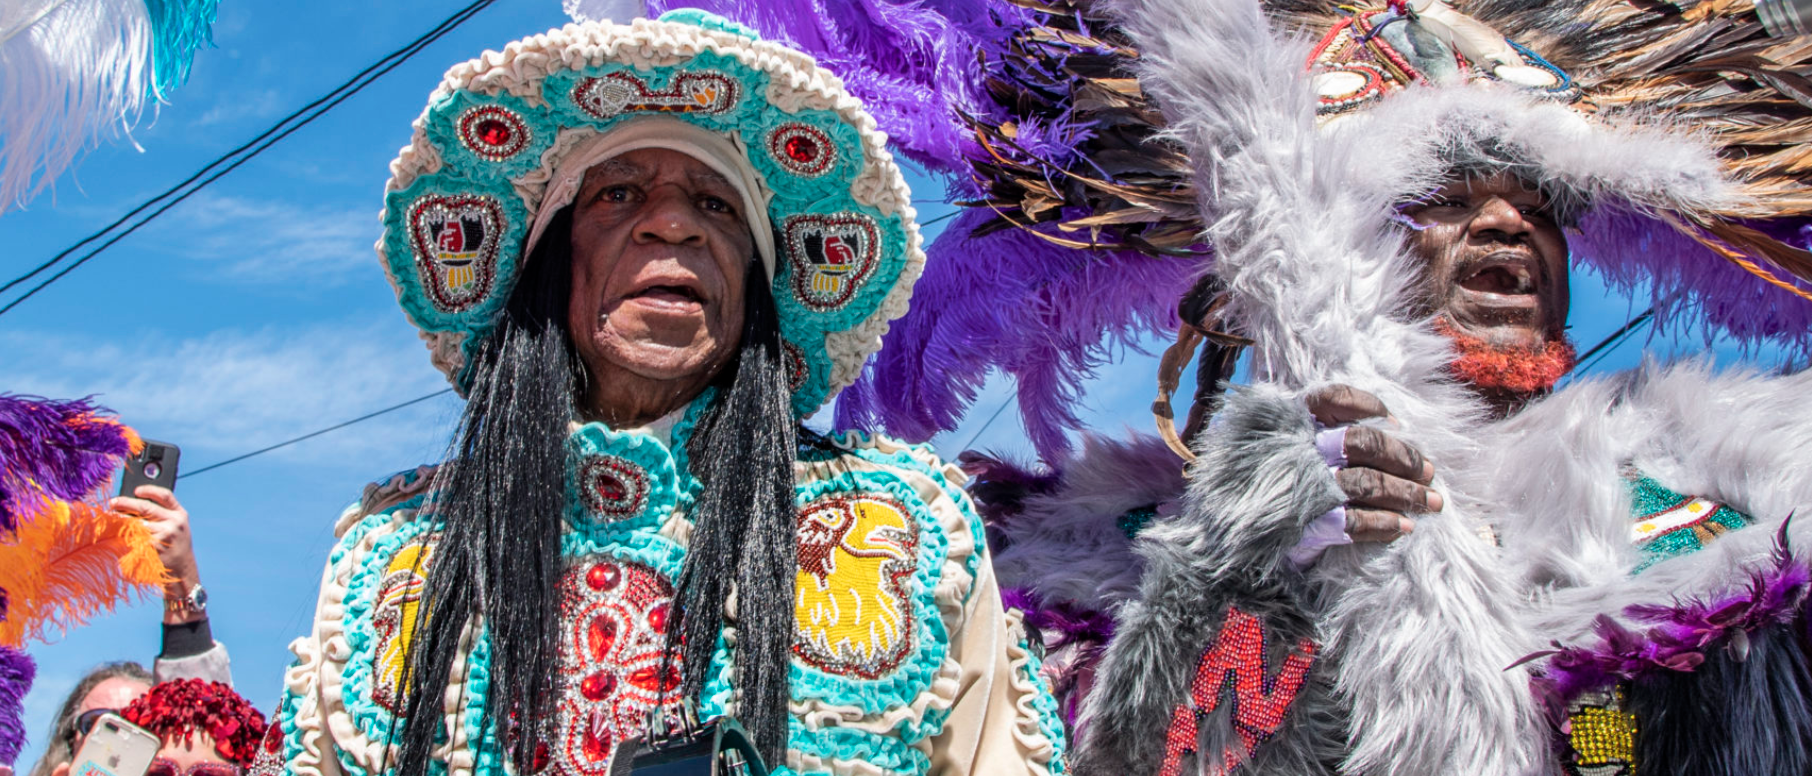 Exhibition of photographs of Big Chief Monk Boudreaux and the